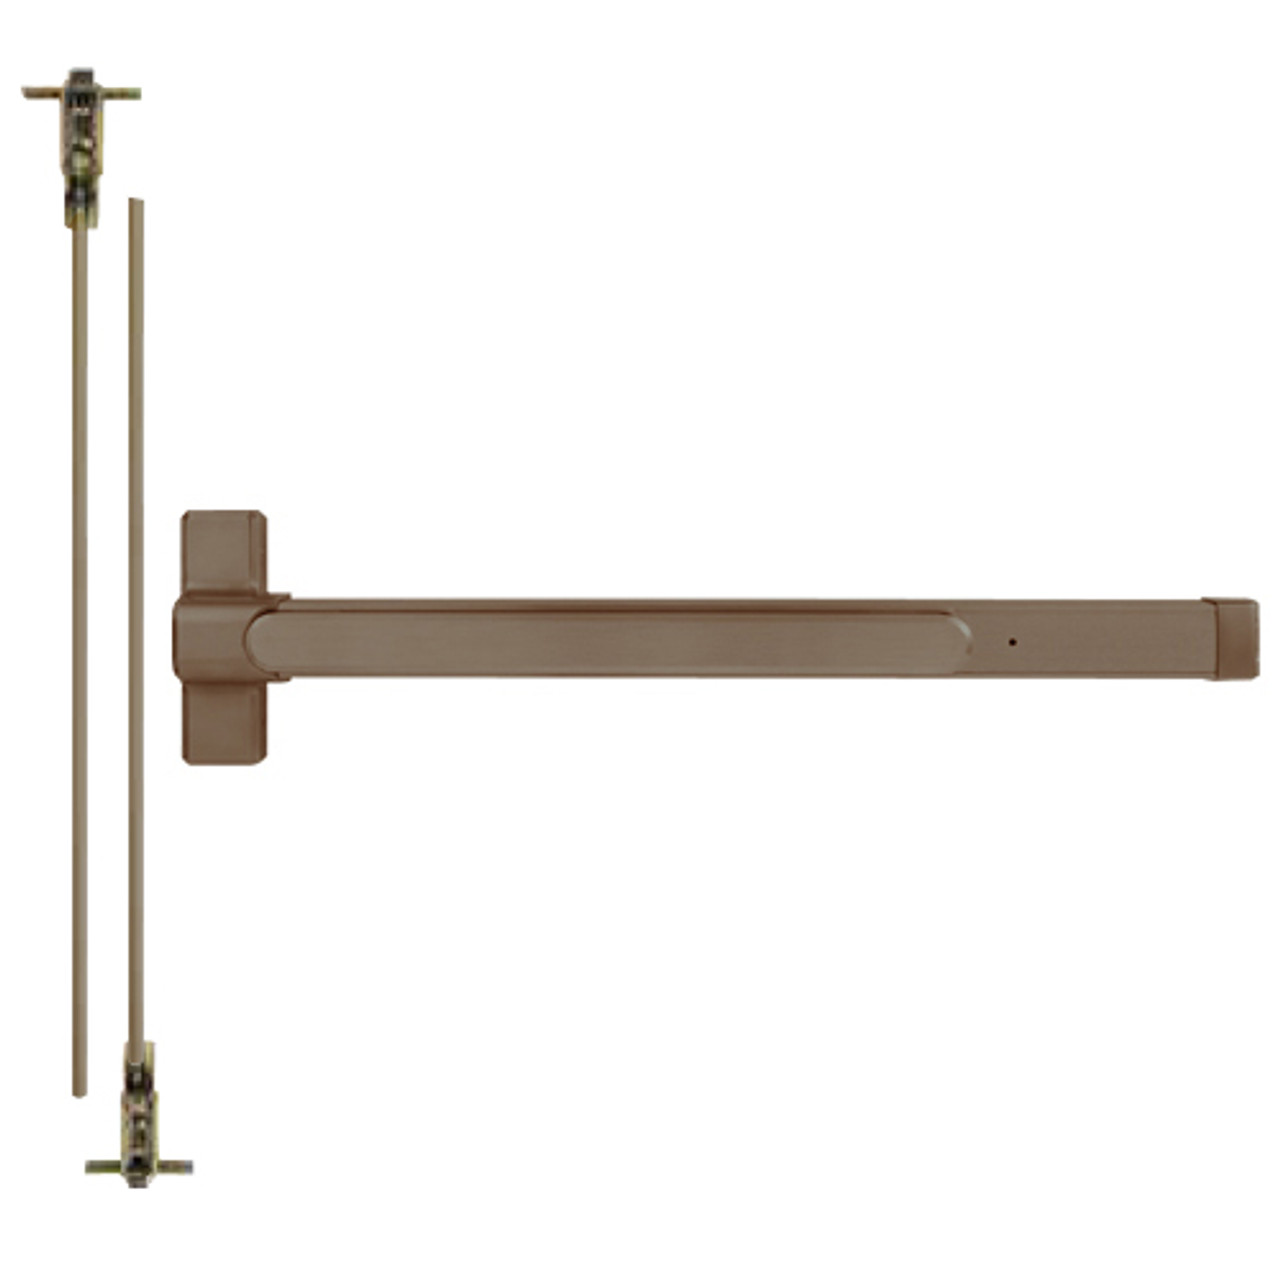 QED124EDX-48-8-313AN Stanley QED100 Series Heavy Duty Concealed Vertical Rod Hex Dog Exit Device in Anodized Duranodic Bronze Finish